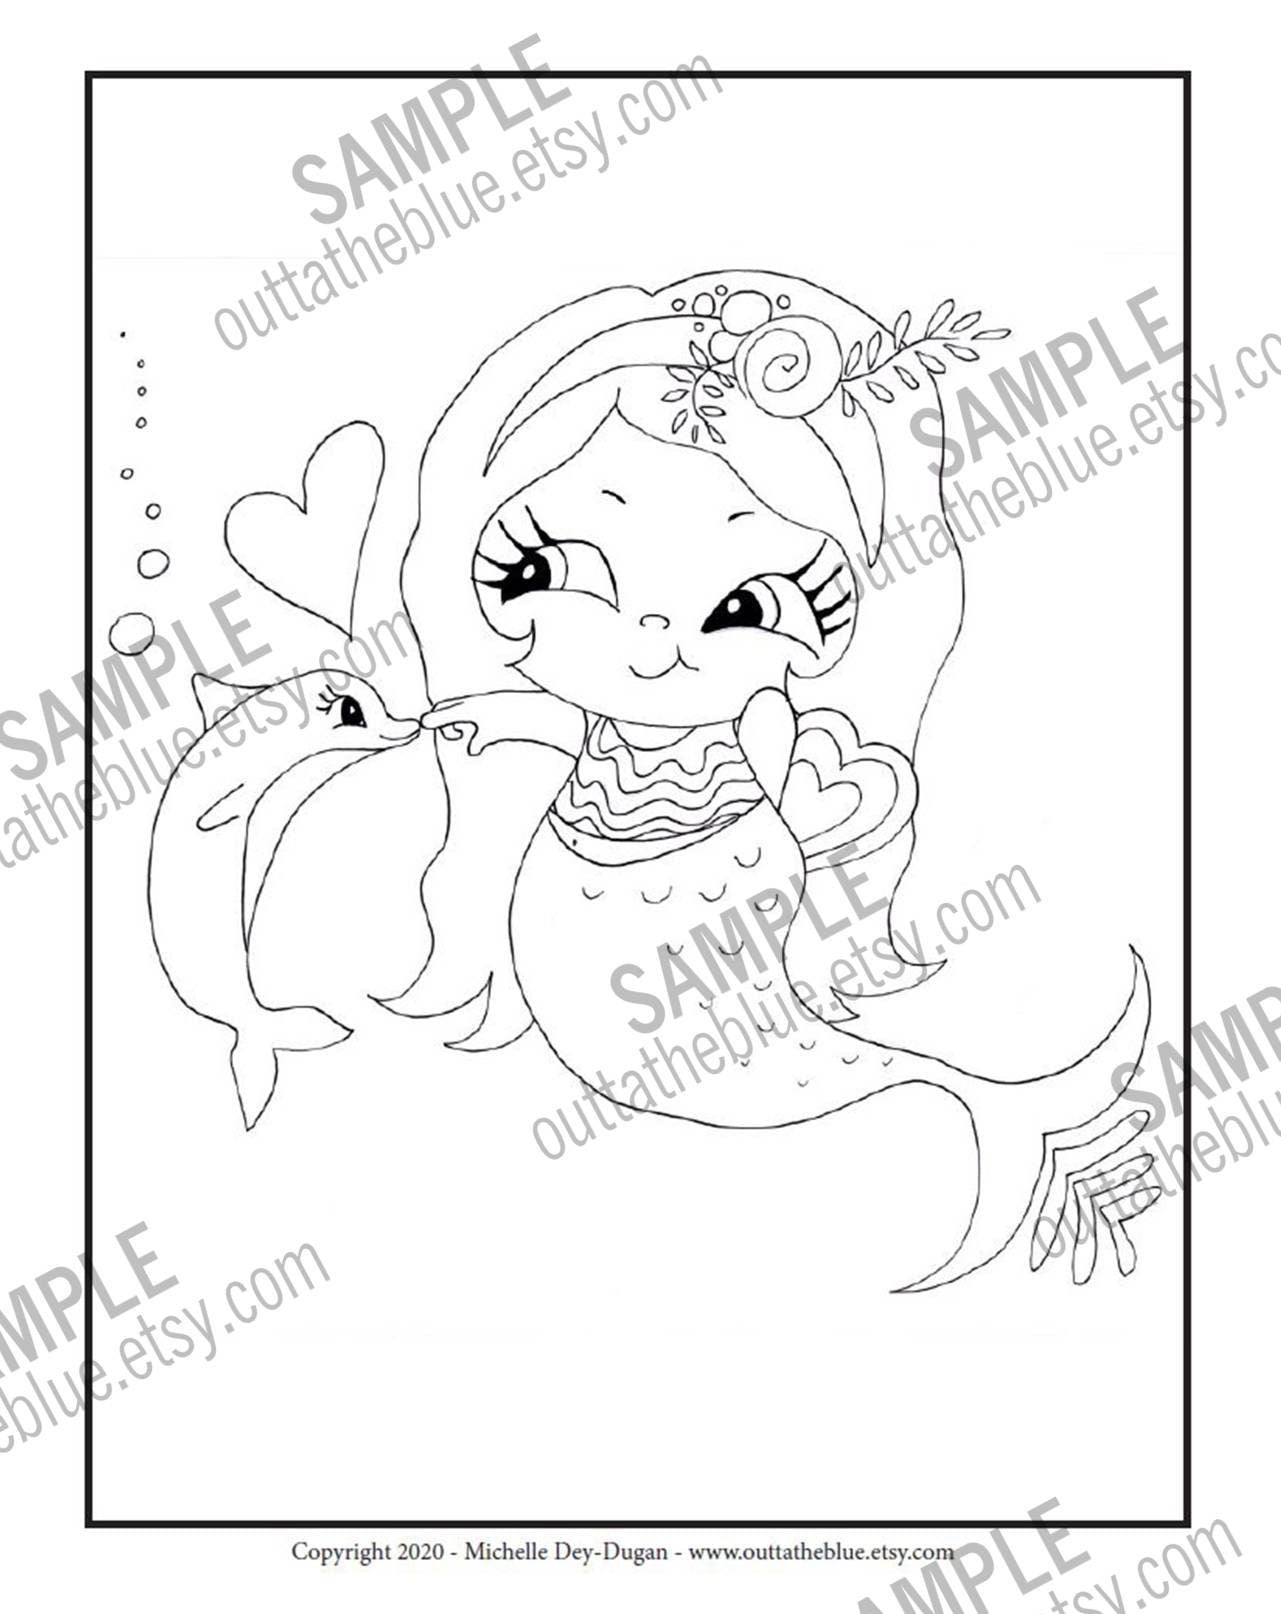 Cute Sea Printable Coloring Pages for kids, digital upload PDF files, children's coloring sheets, mermaid pictures to color, 15 pages